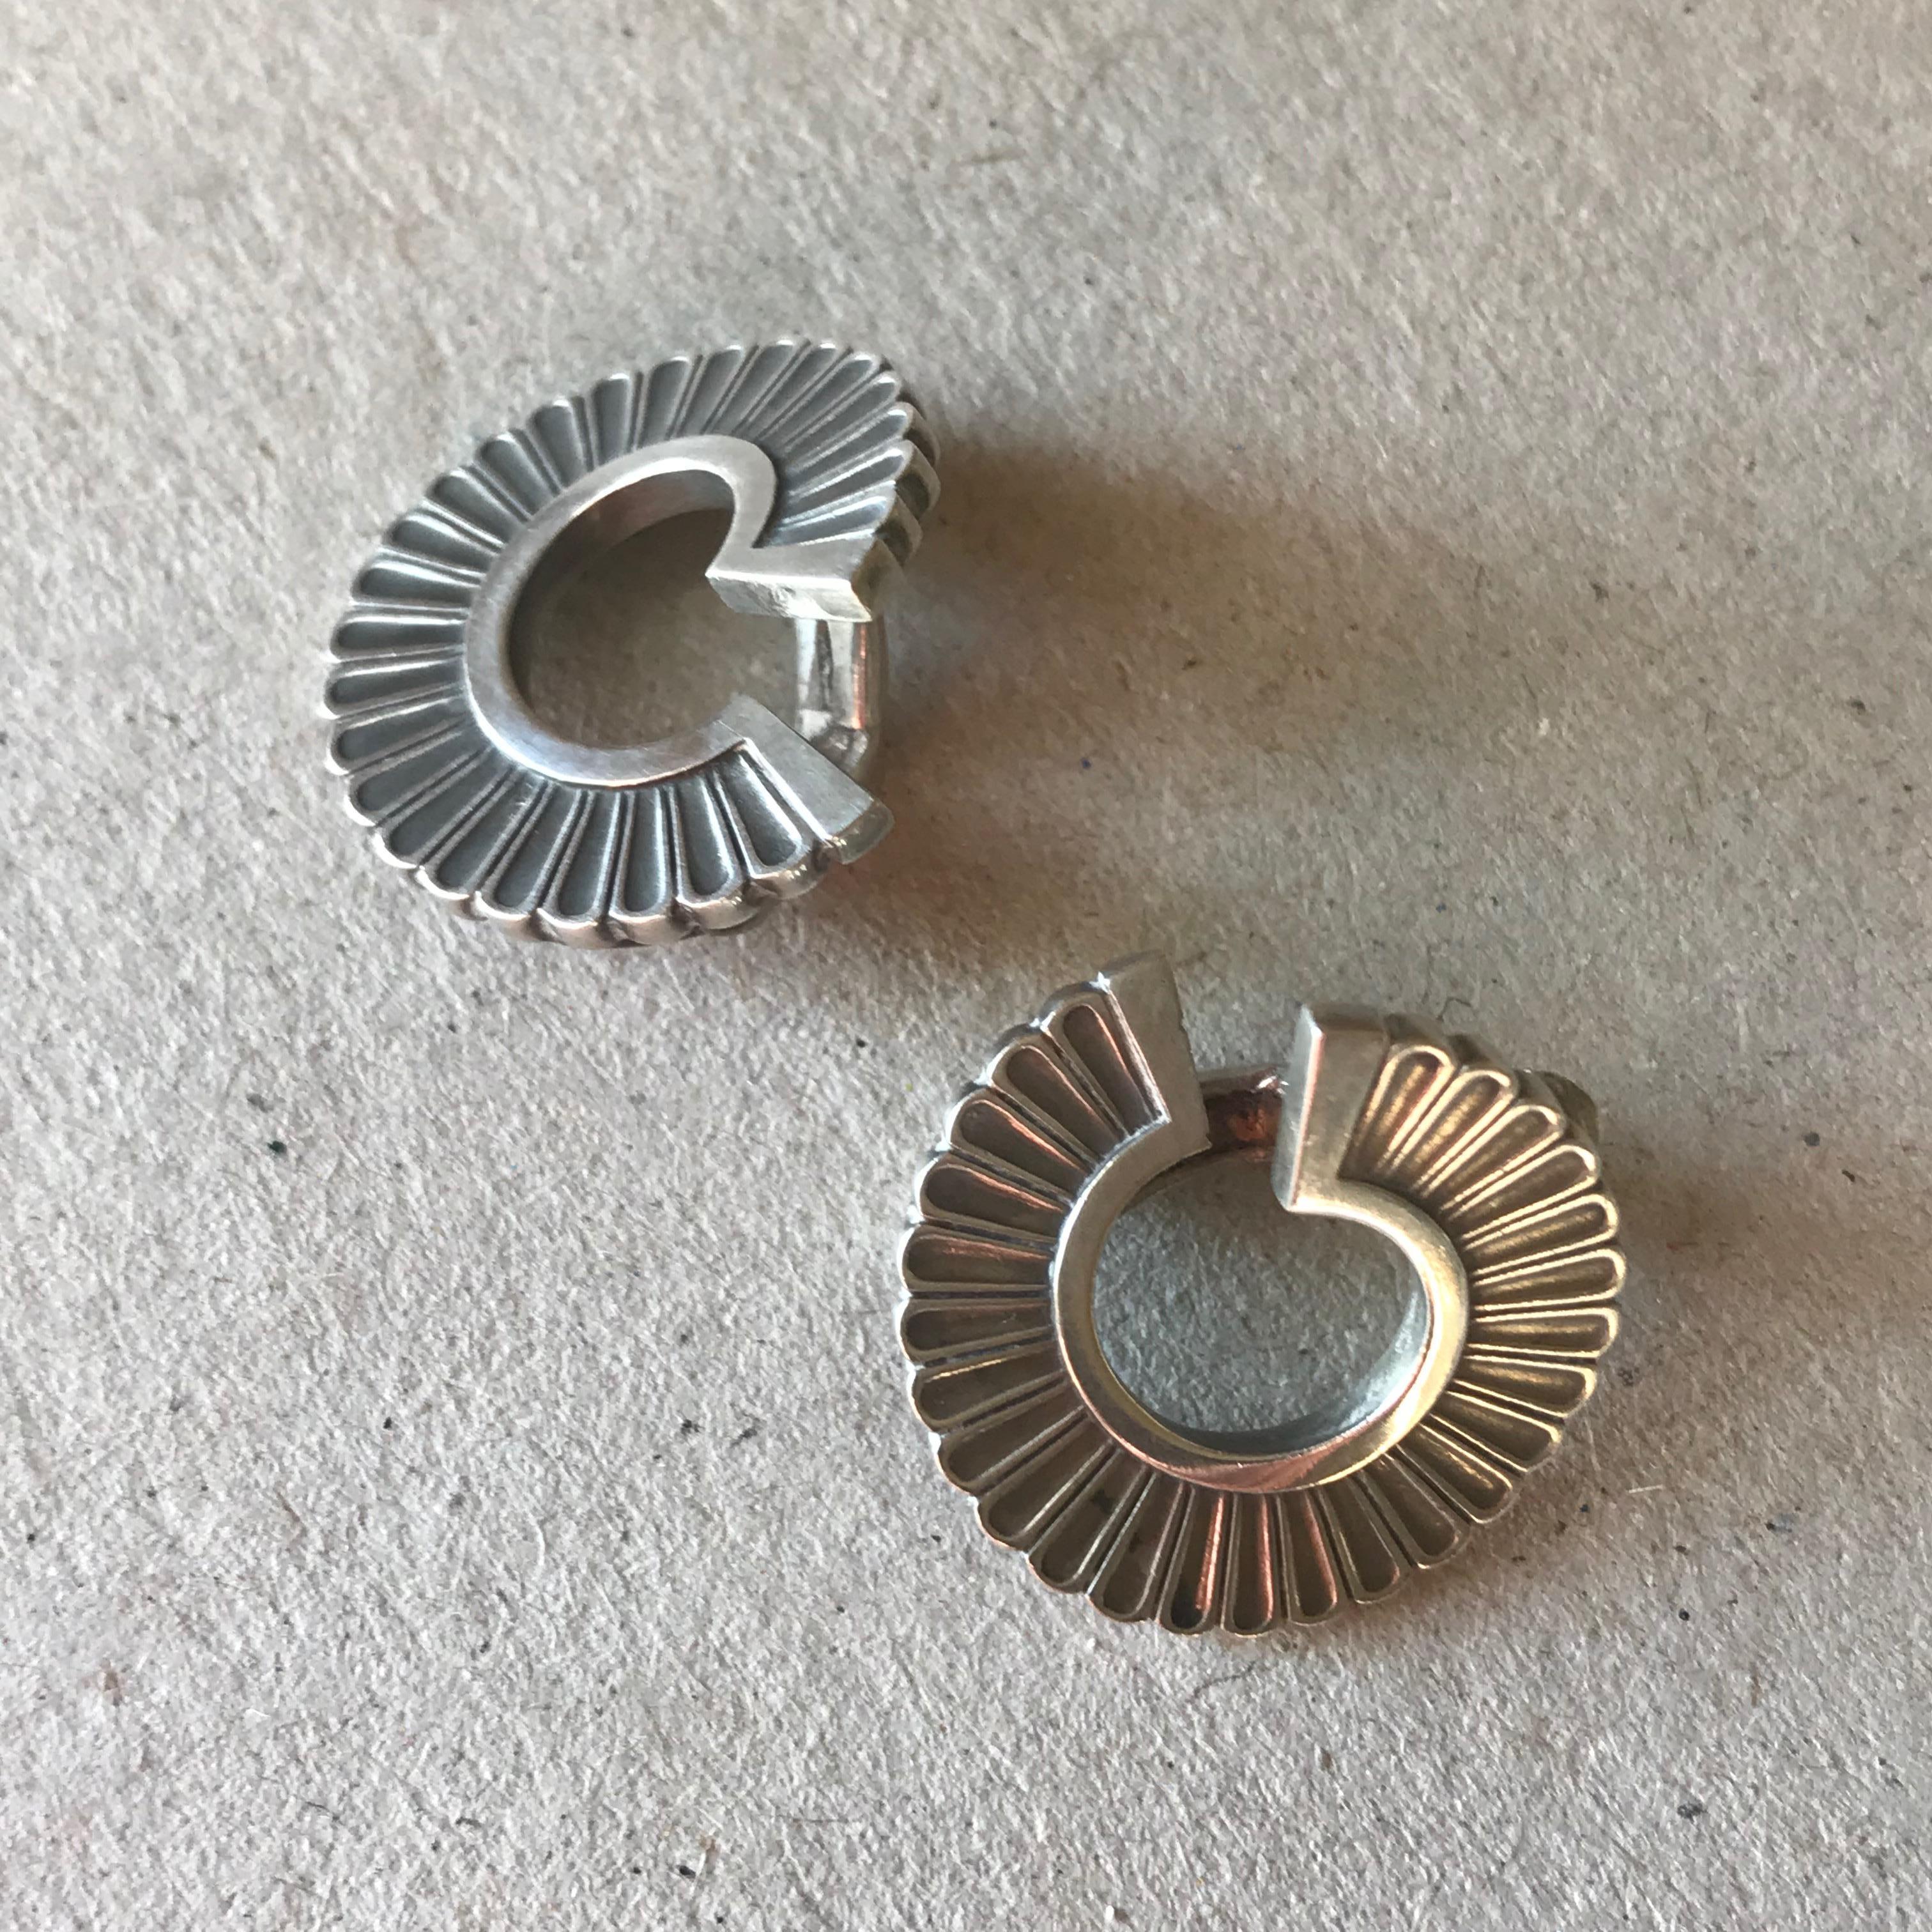 Georg Jensen Sterling Silver Earrings No. 92 by Jorgen Jensen in the art deco style.
Circa 1940's. Clip on back.

Complimentary gift box included with purchase.